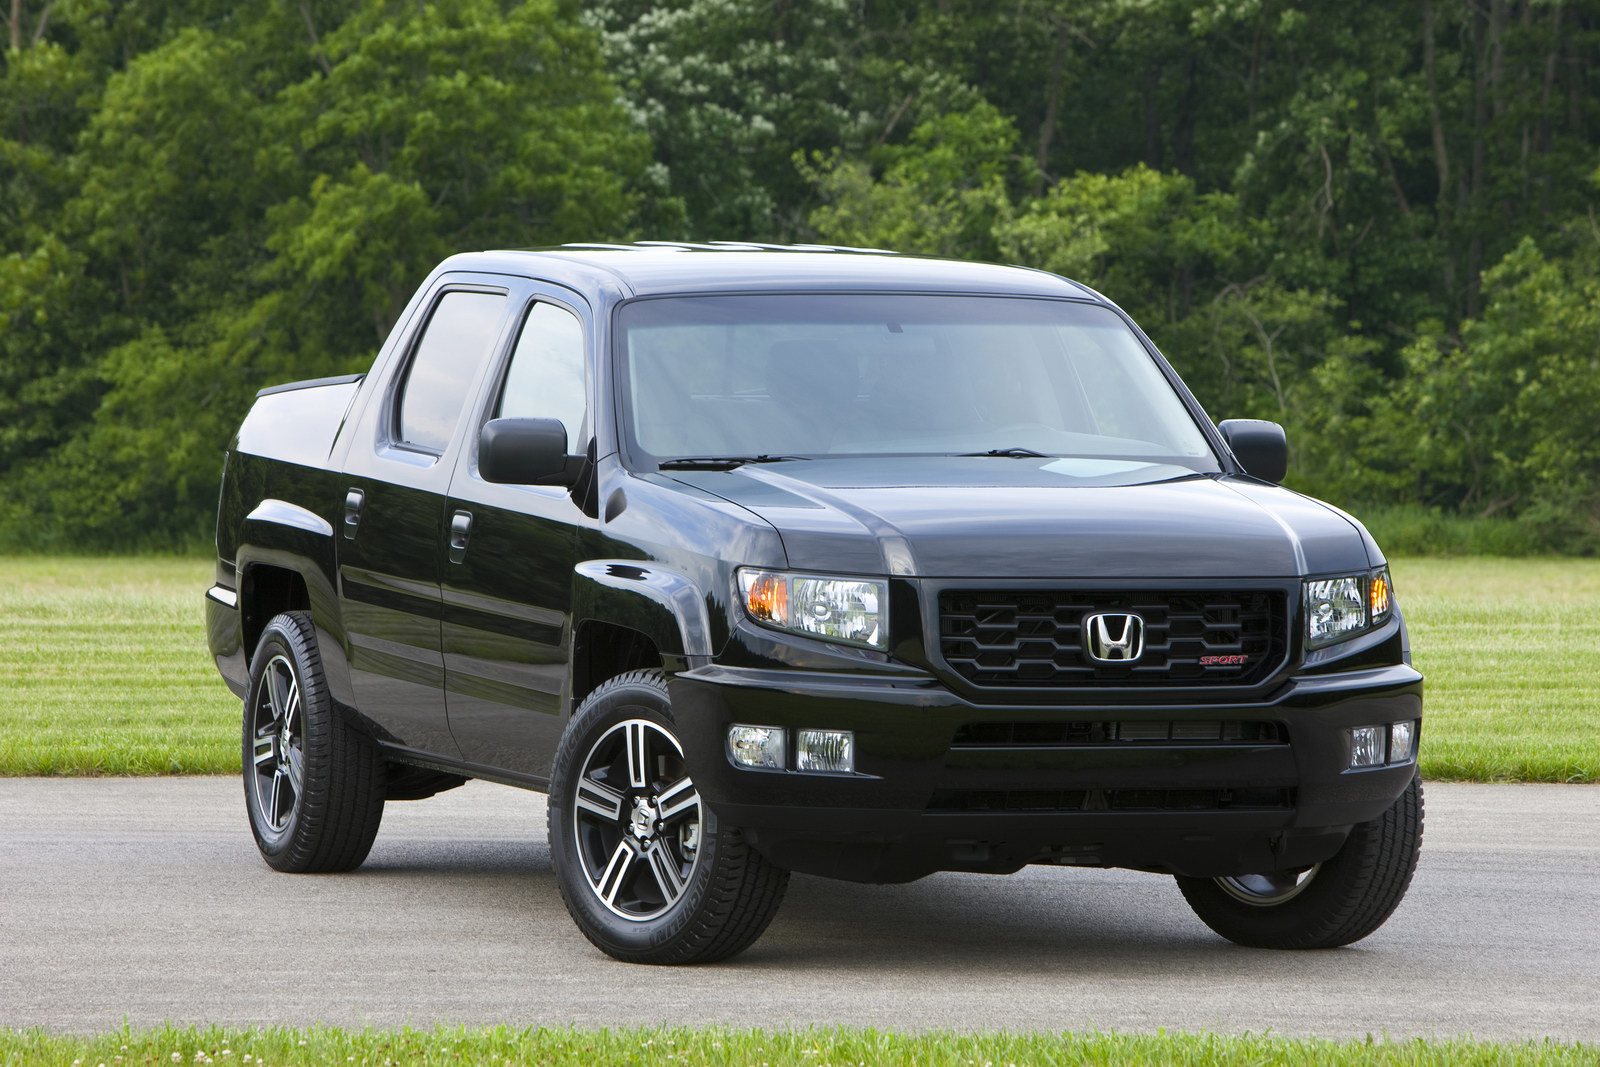 2012 Honda Ridgeline Pictured, Priced and Detailed, gets New Sport Trim |  Carscoops